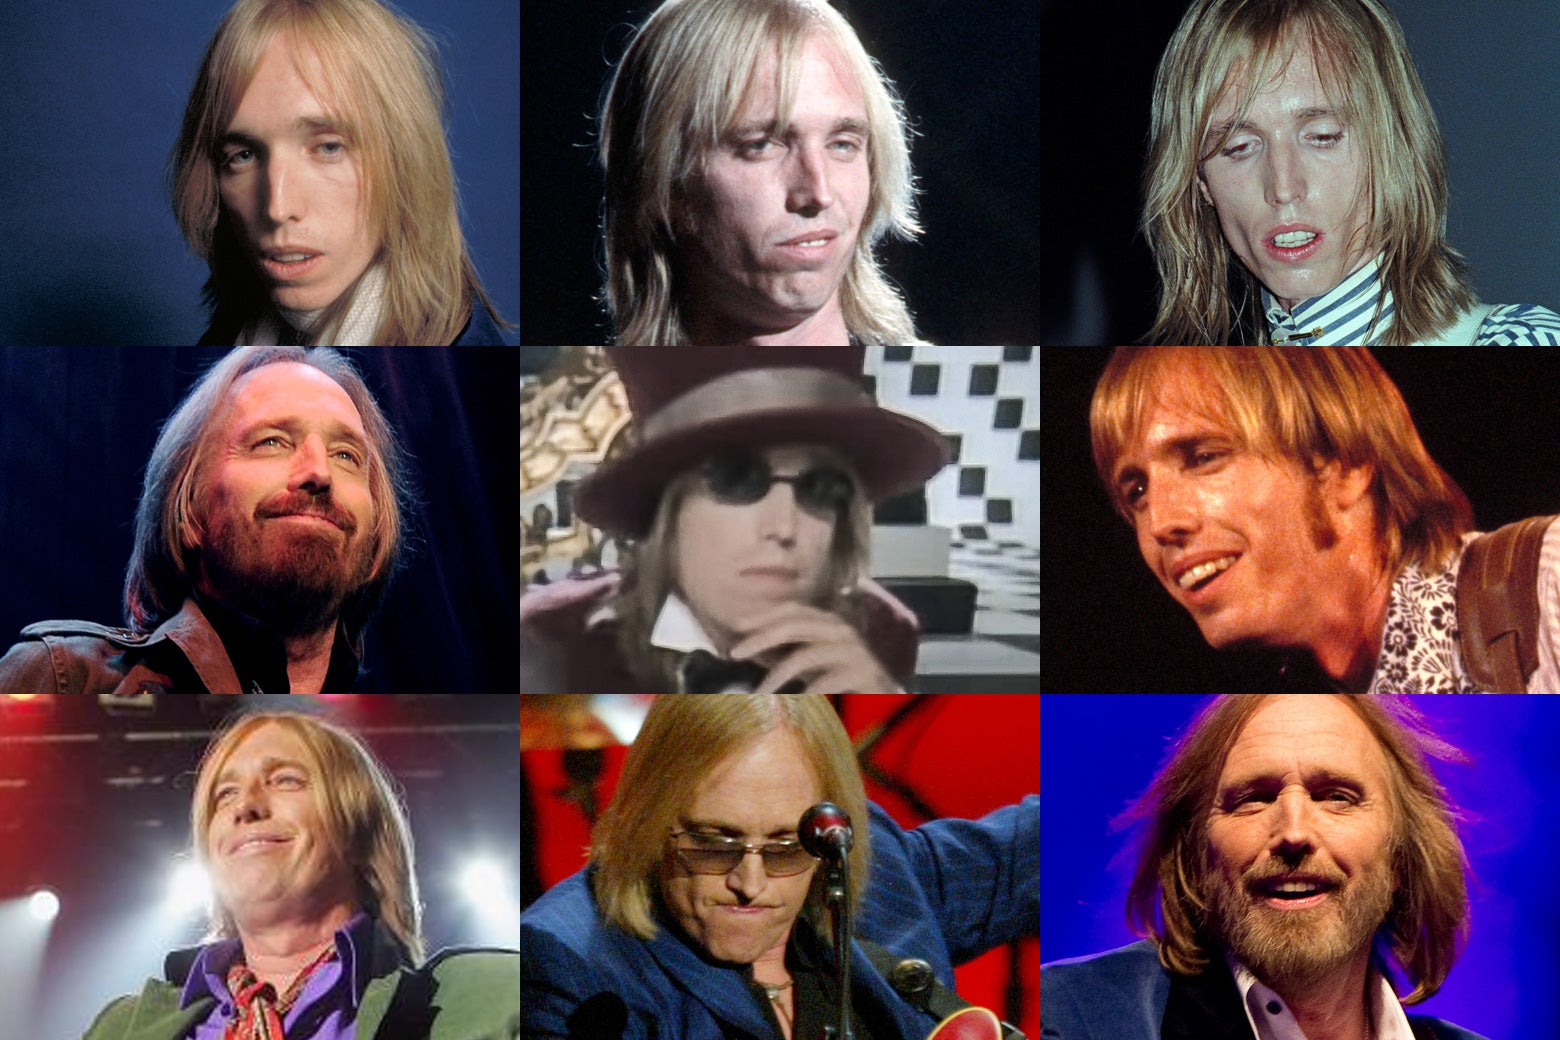 Tom Petty spanned classic, country, heartland rock, new wave, dance pop, and grunge over nearly 40 years.